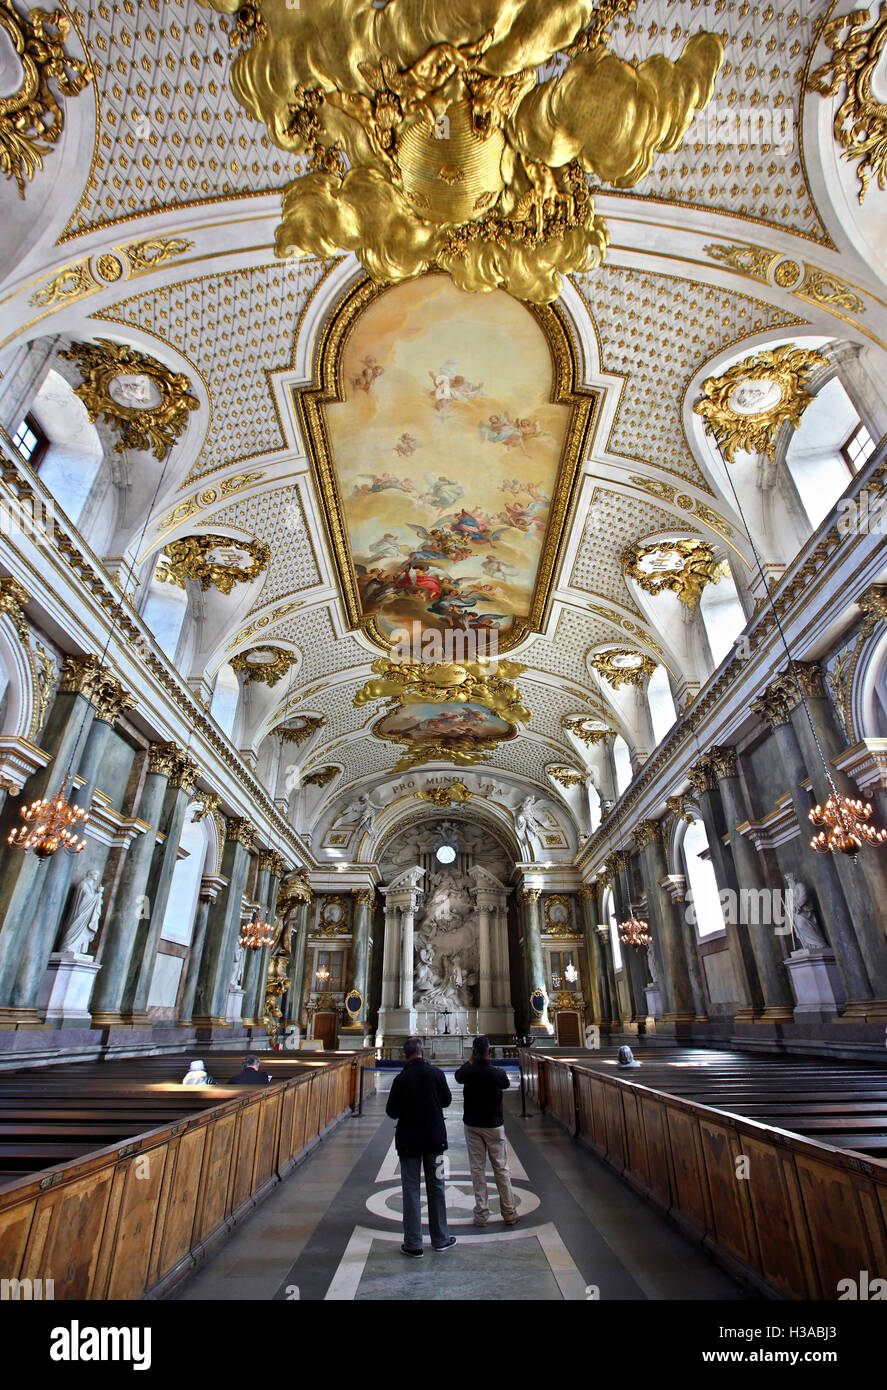 The Royal Chapel inside the Royal Palace (Kungliga Slottet), in Gamla Stan (the old town), Stockholm, Sweden. Stock Photo